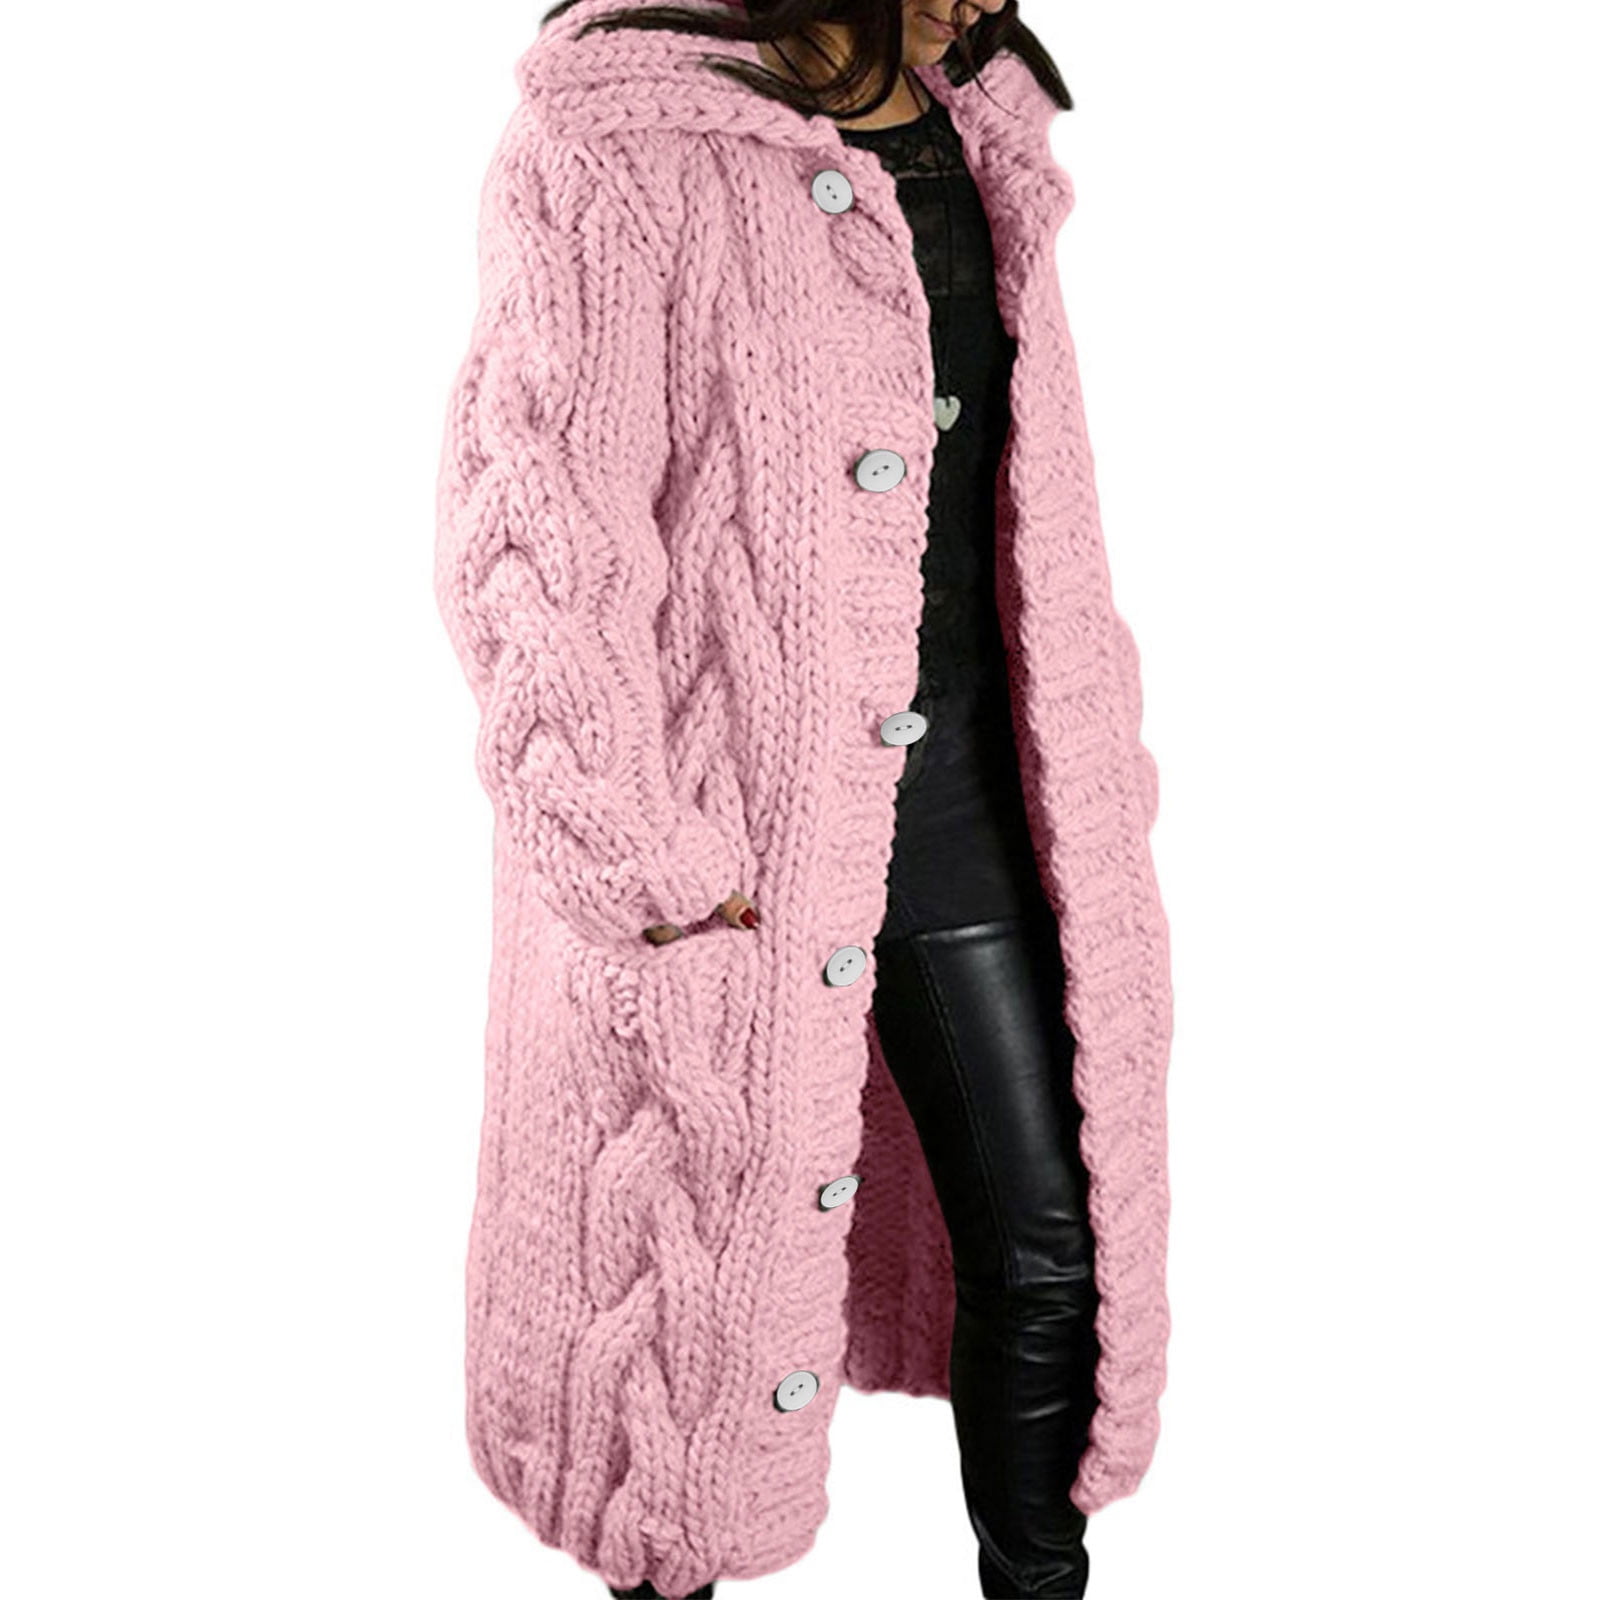 Winter Coats for Women Winter Cardigan Sweaters for Women Cable Knit ...